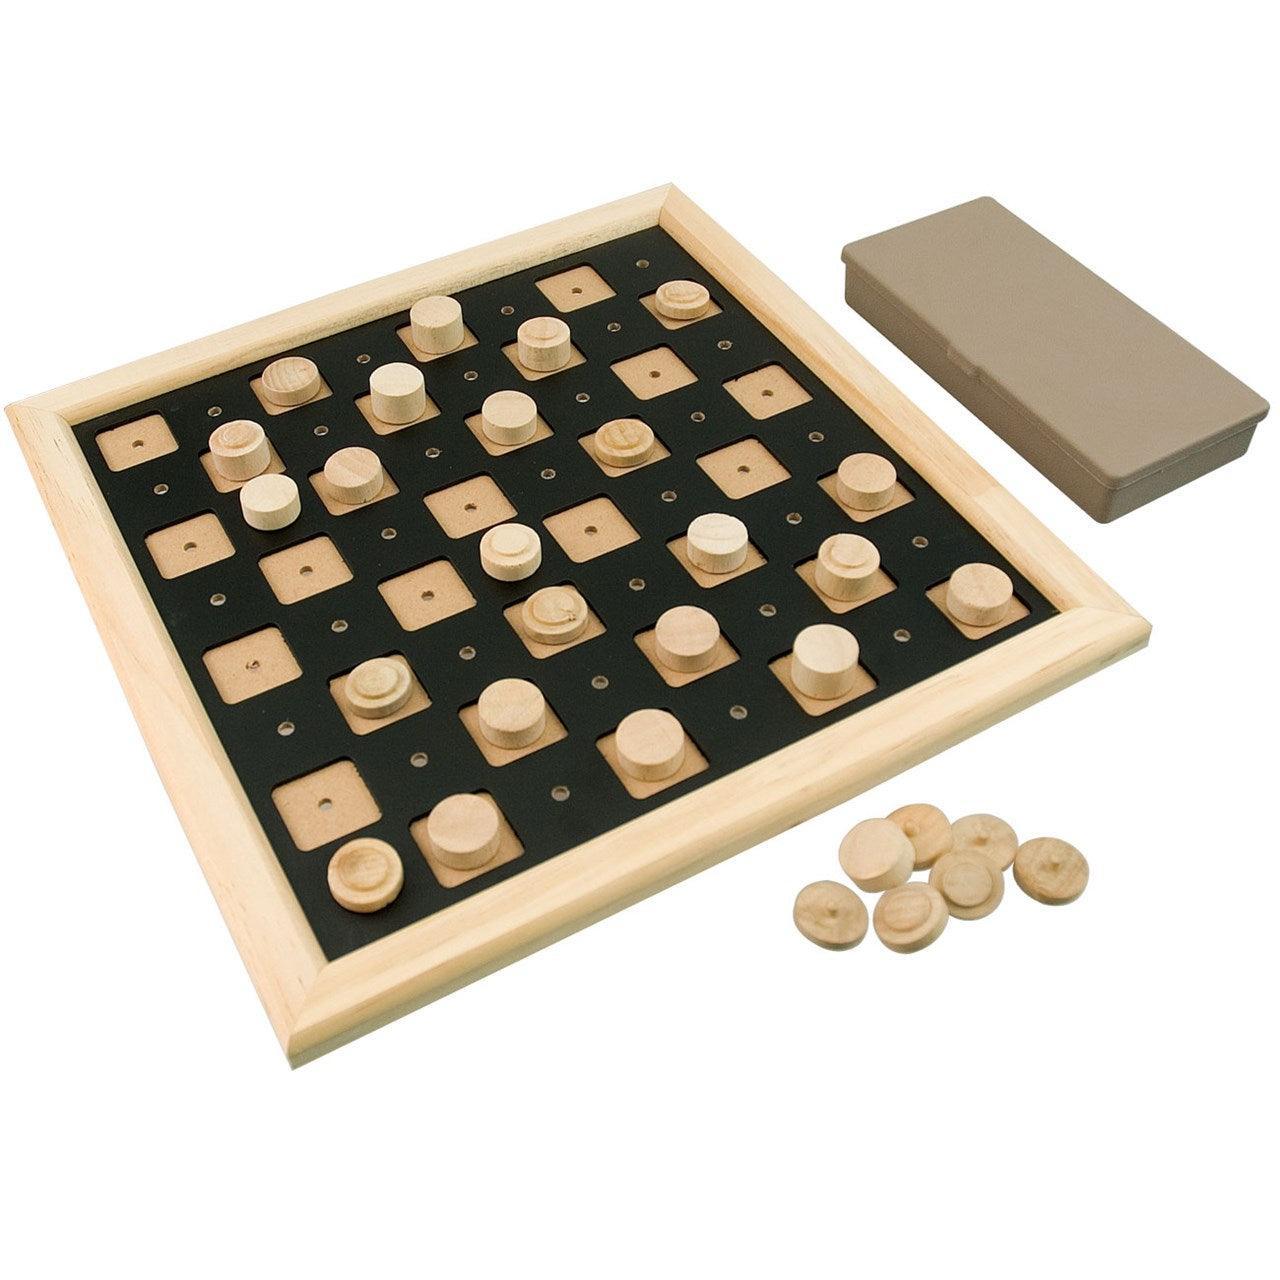 Large Table Top Chess Set for the Blind or Those With Low Vision